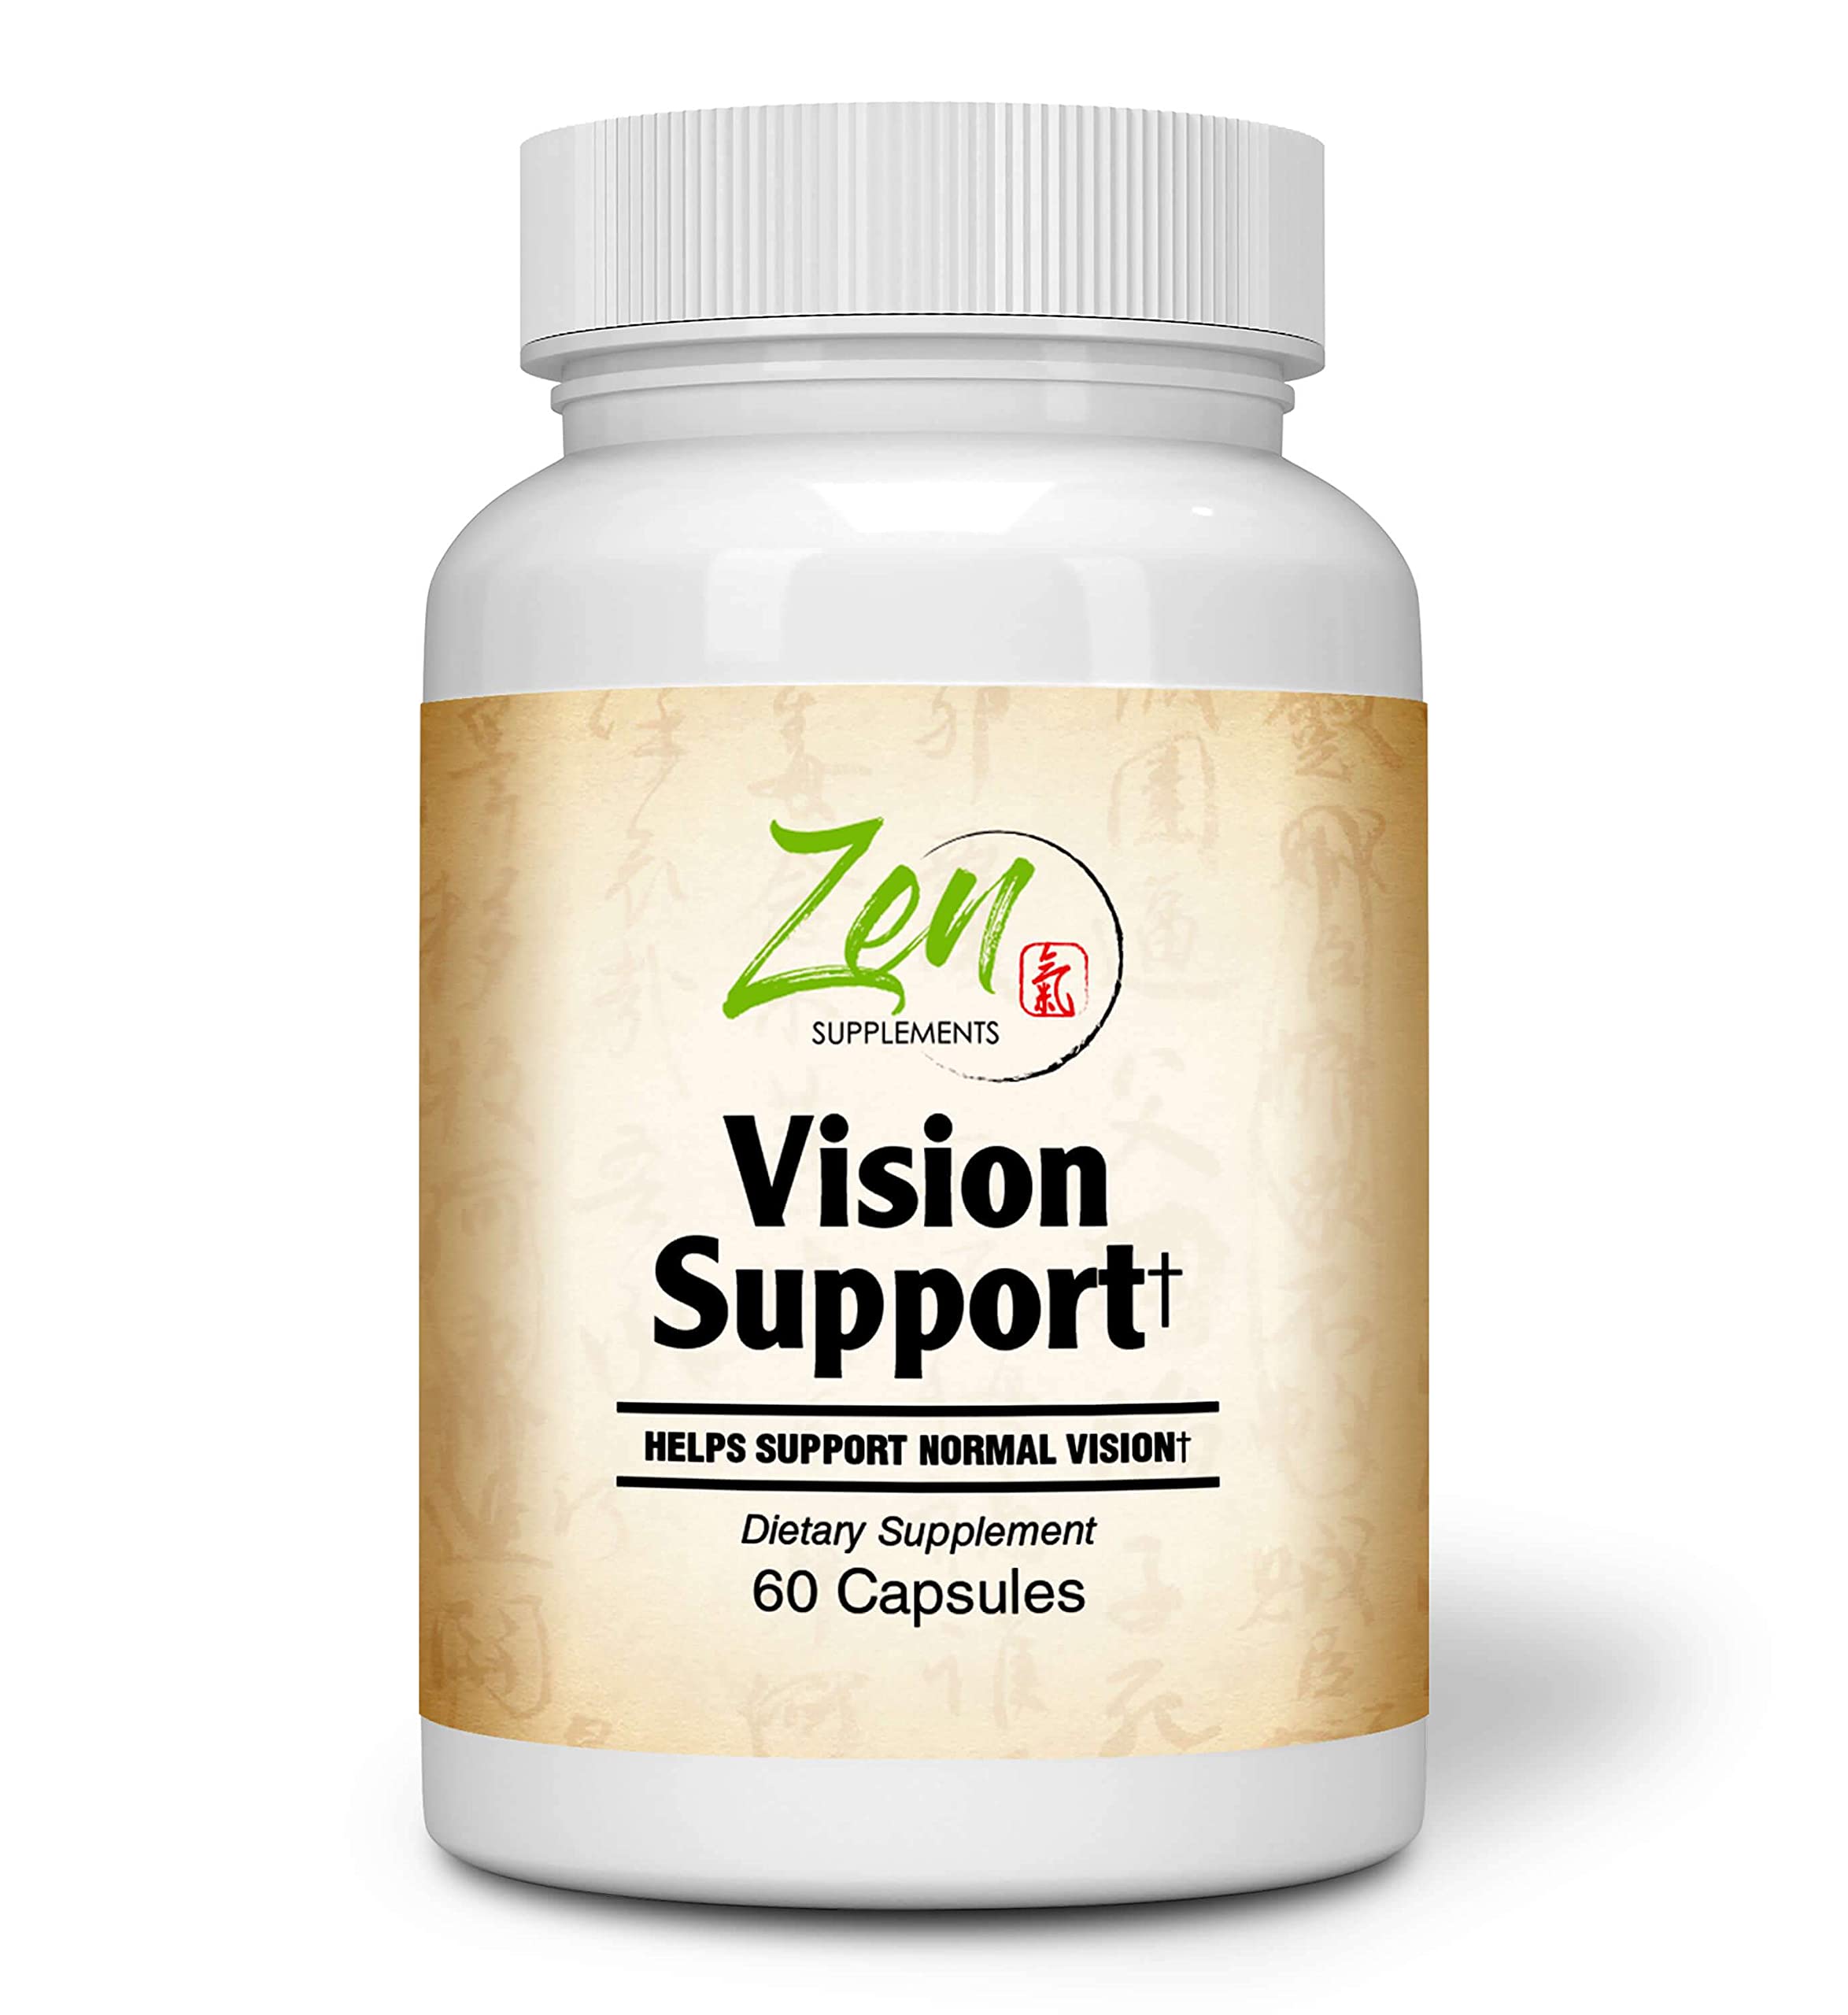 Zen Supplements - Vision Support with Lutein, Bilberry, Eyebright & Carotenoids 60-Caps - Vitamin, Herbal & Nutrient Blend Supports Vision Health & Macular Health